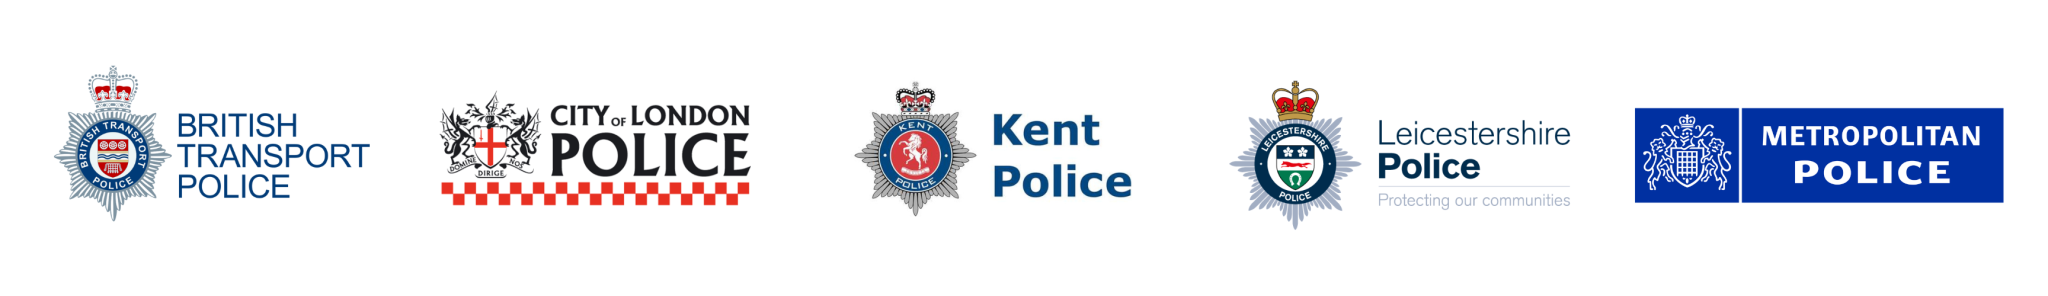 Five Police force logos - British Transport Police, City of London Police, Kent Police, Leceistershire Police, Metropolitan Police